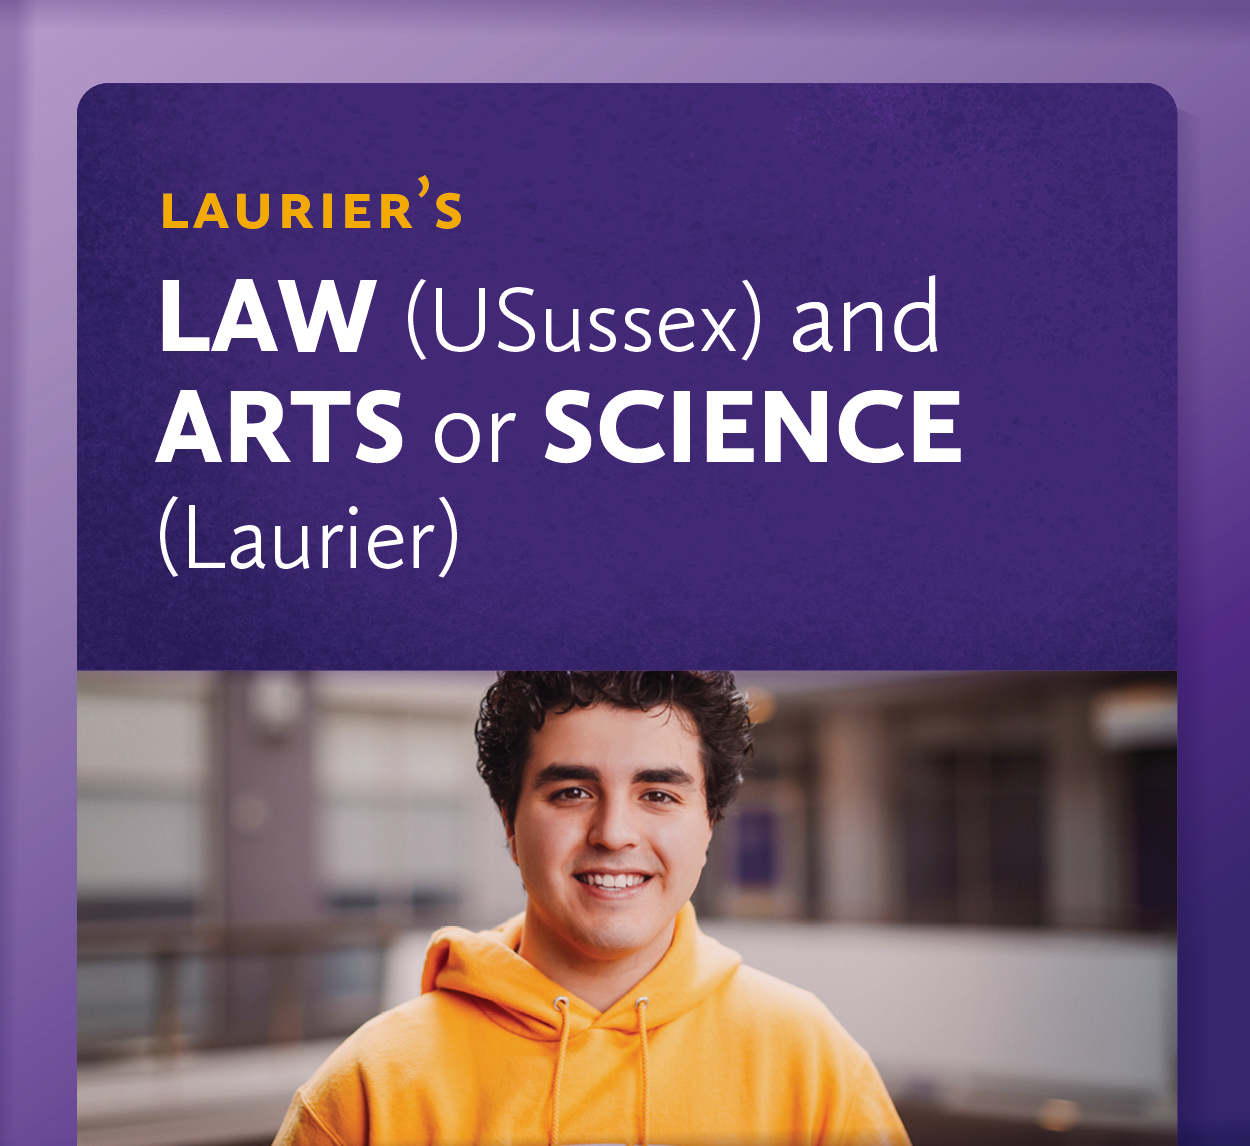 Showcase Image for Law (USussex) and Arts (Laurier)